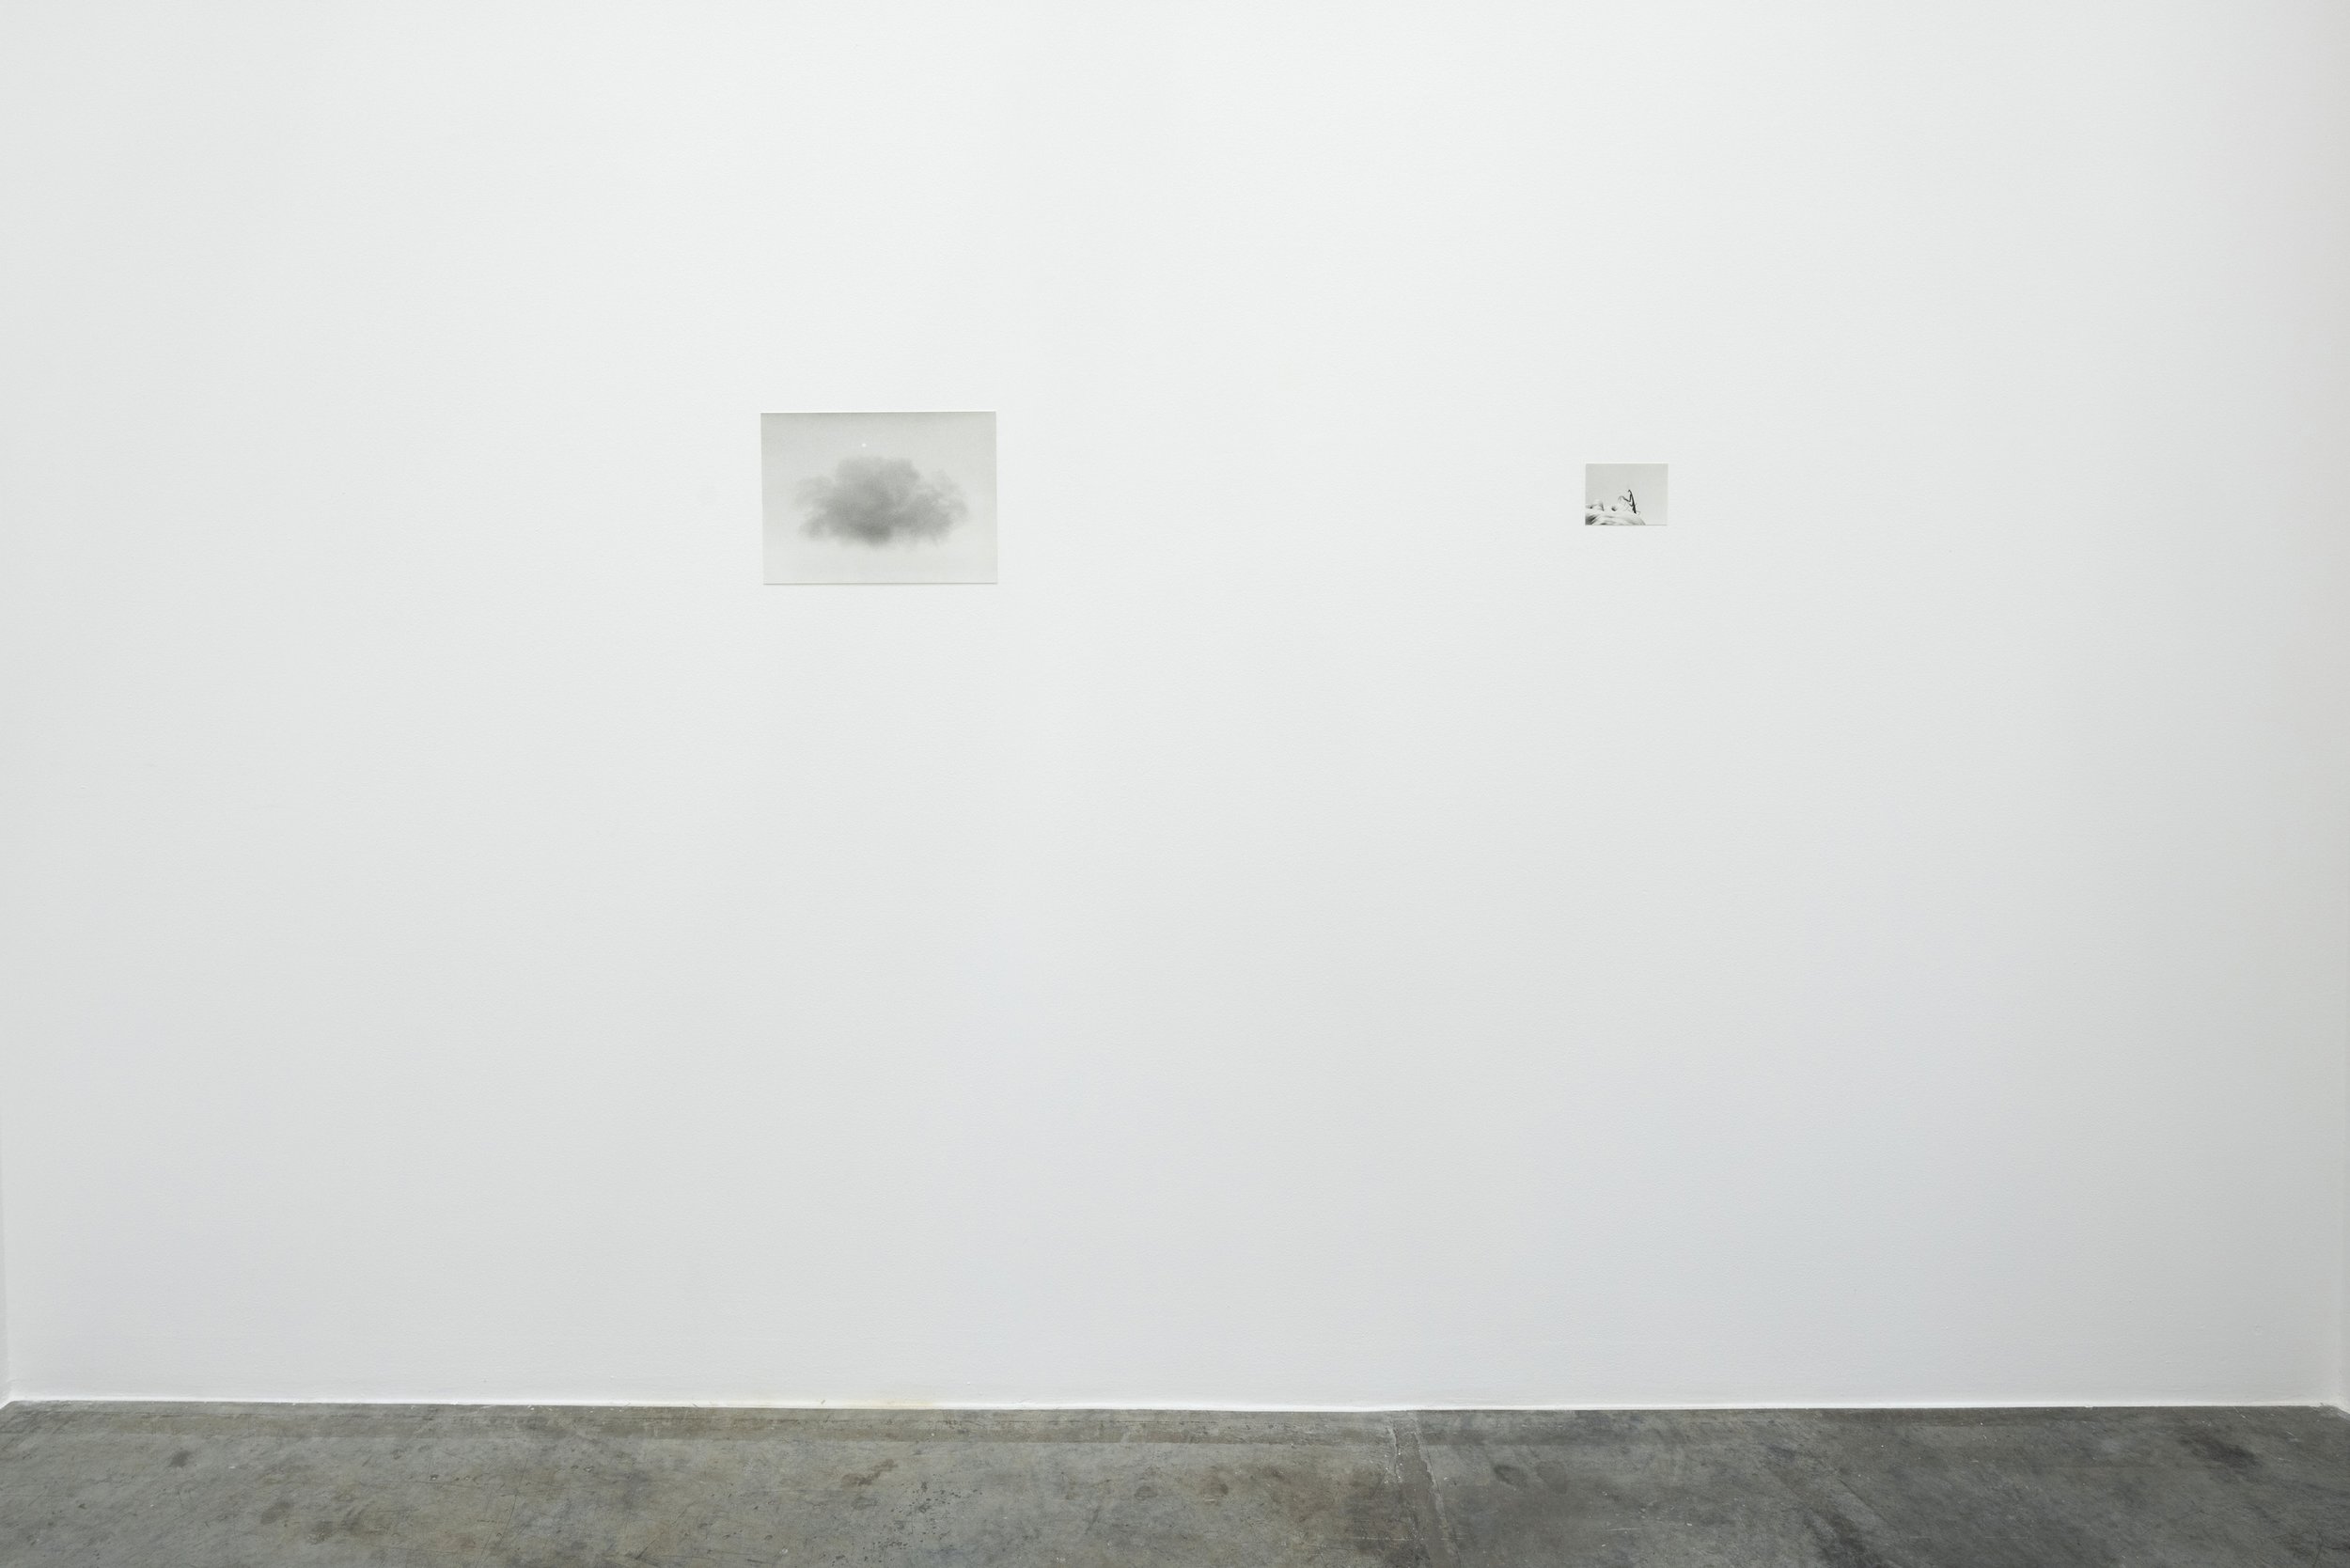  Installation view / Natural Sources L-R  Cloud and Moon, 2020, silver gelatin print, 27.5 x 38 cm, edition 4/5 / Praying Mantis, 2022, silver gelatin print, 10 x 13 cm, edition 1/5 